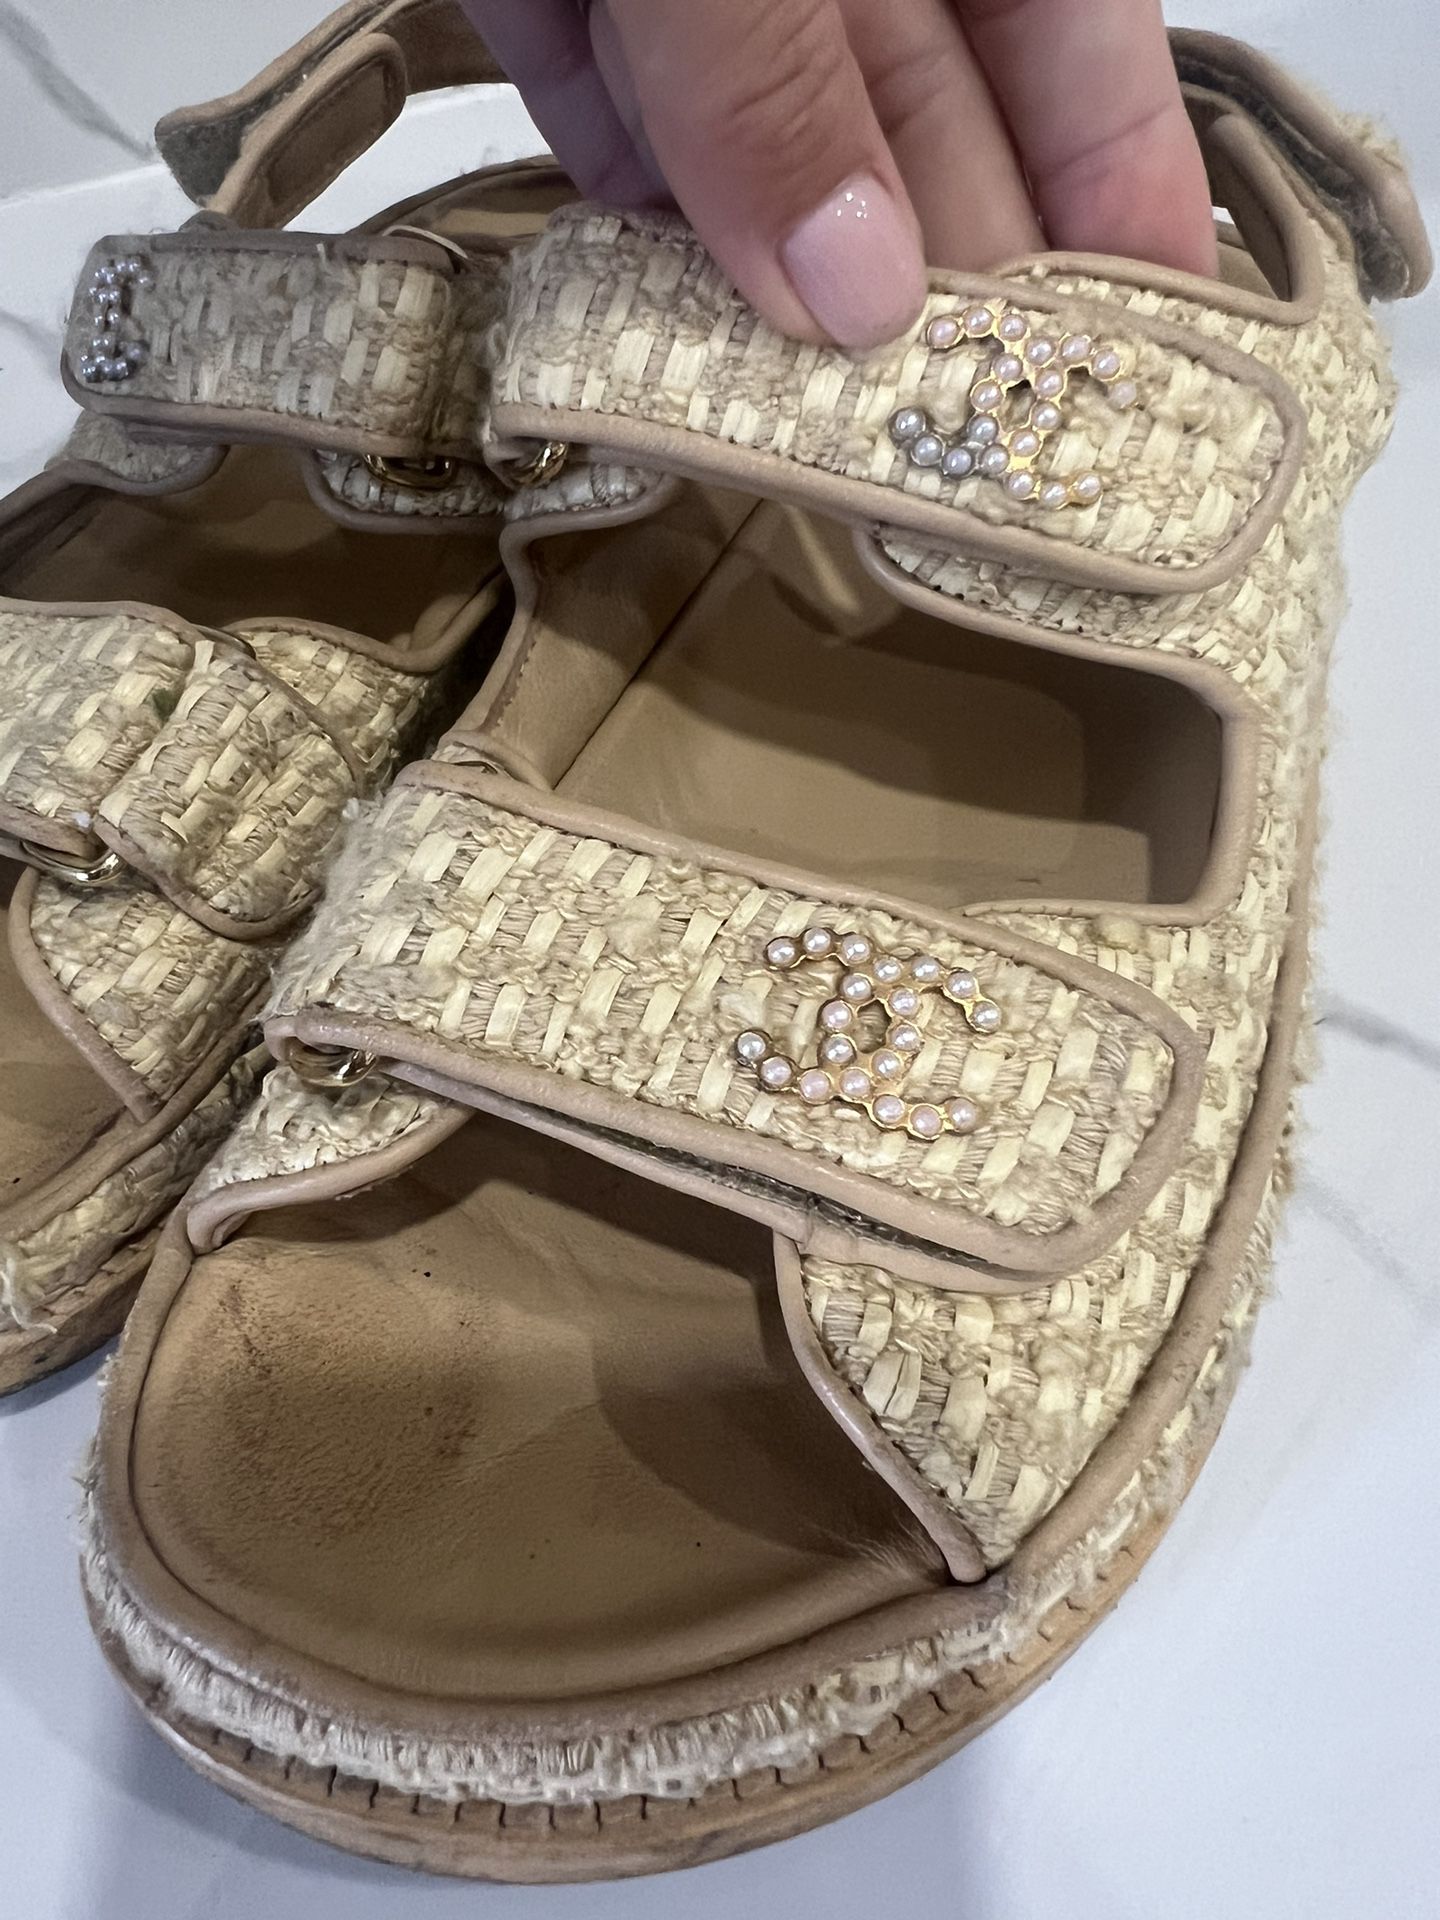 Chanel Summer Sandals 39 Cruise 22 for Sale in Miami, FL - OfferUp